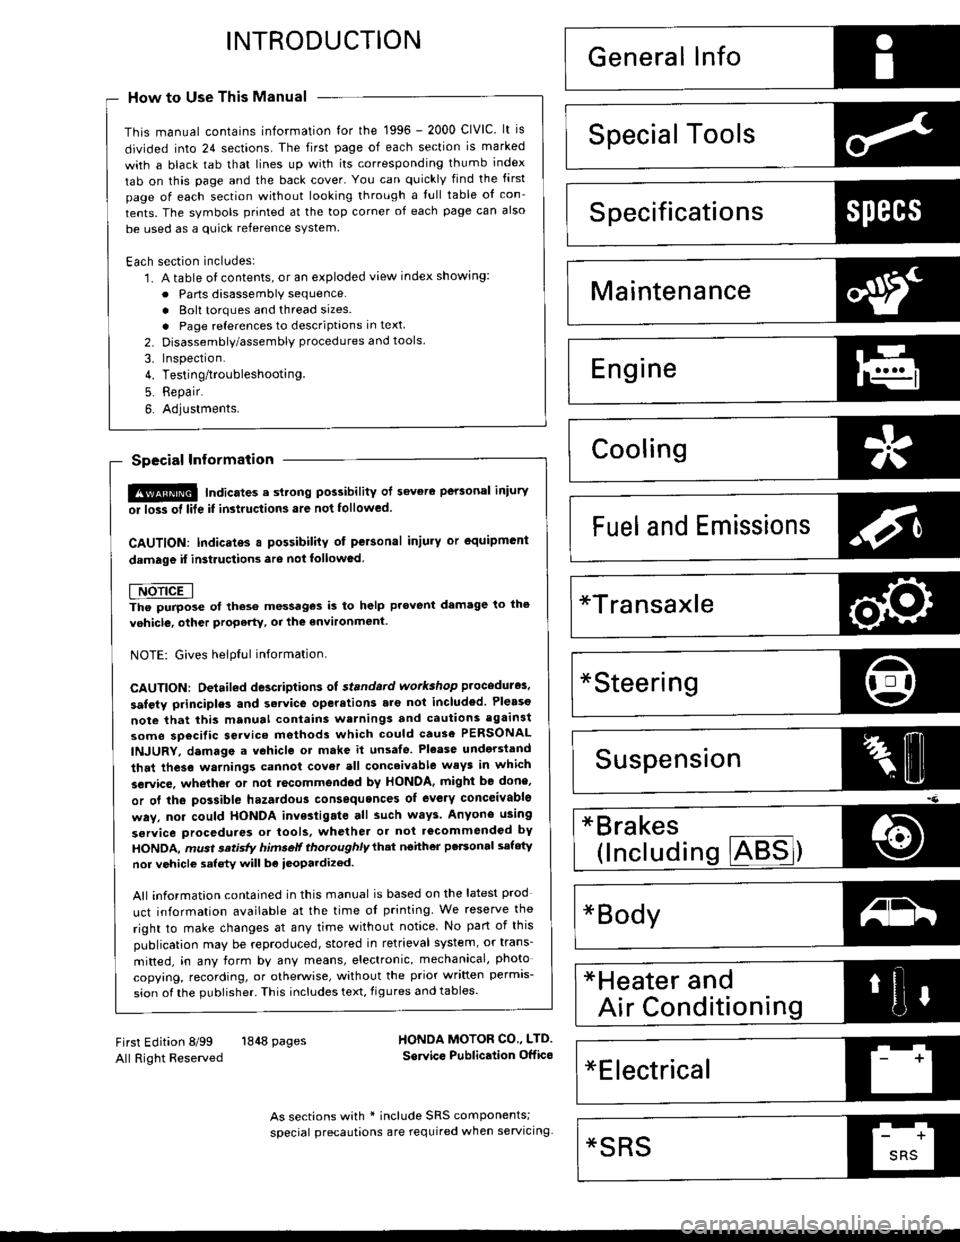 HONDA CIVIC 1997 6.G Workshop Manual INTRODUCTION
How to Use This Manual
This manual contains information for the 1996 - 2000 ClVlC. lt is
divided into 24 sections. The first page of each section is marked
with a black tab that lines up 